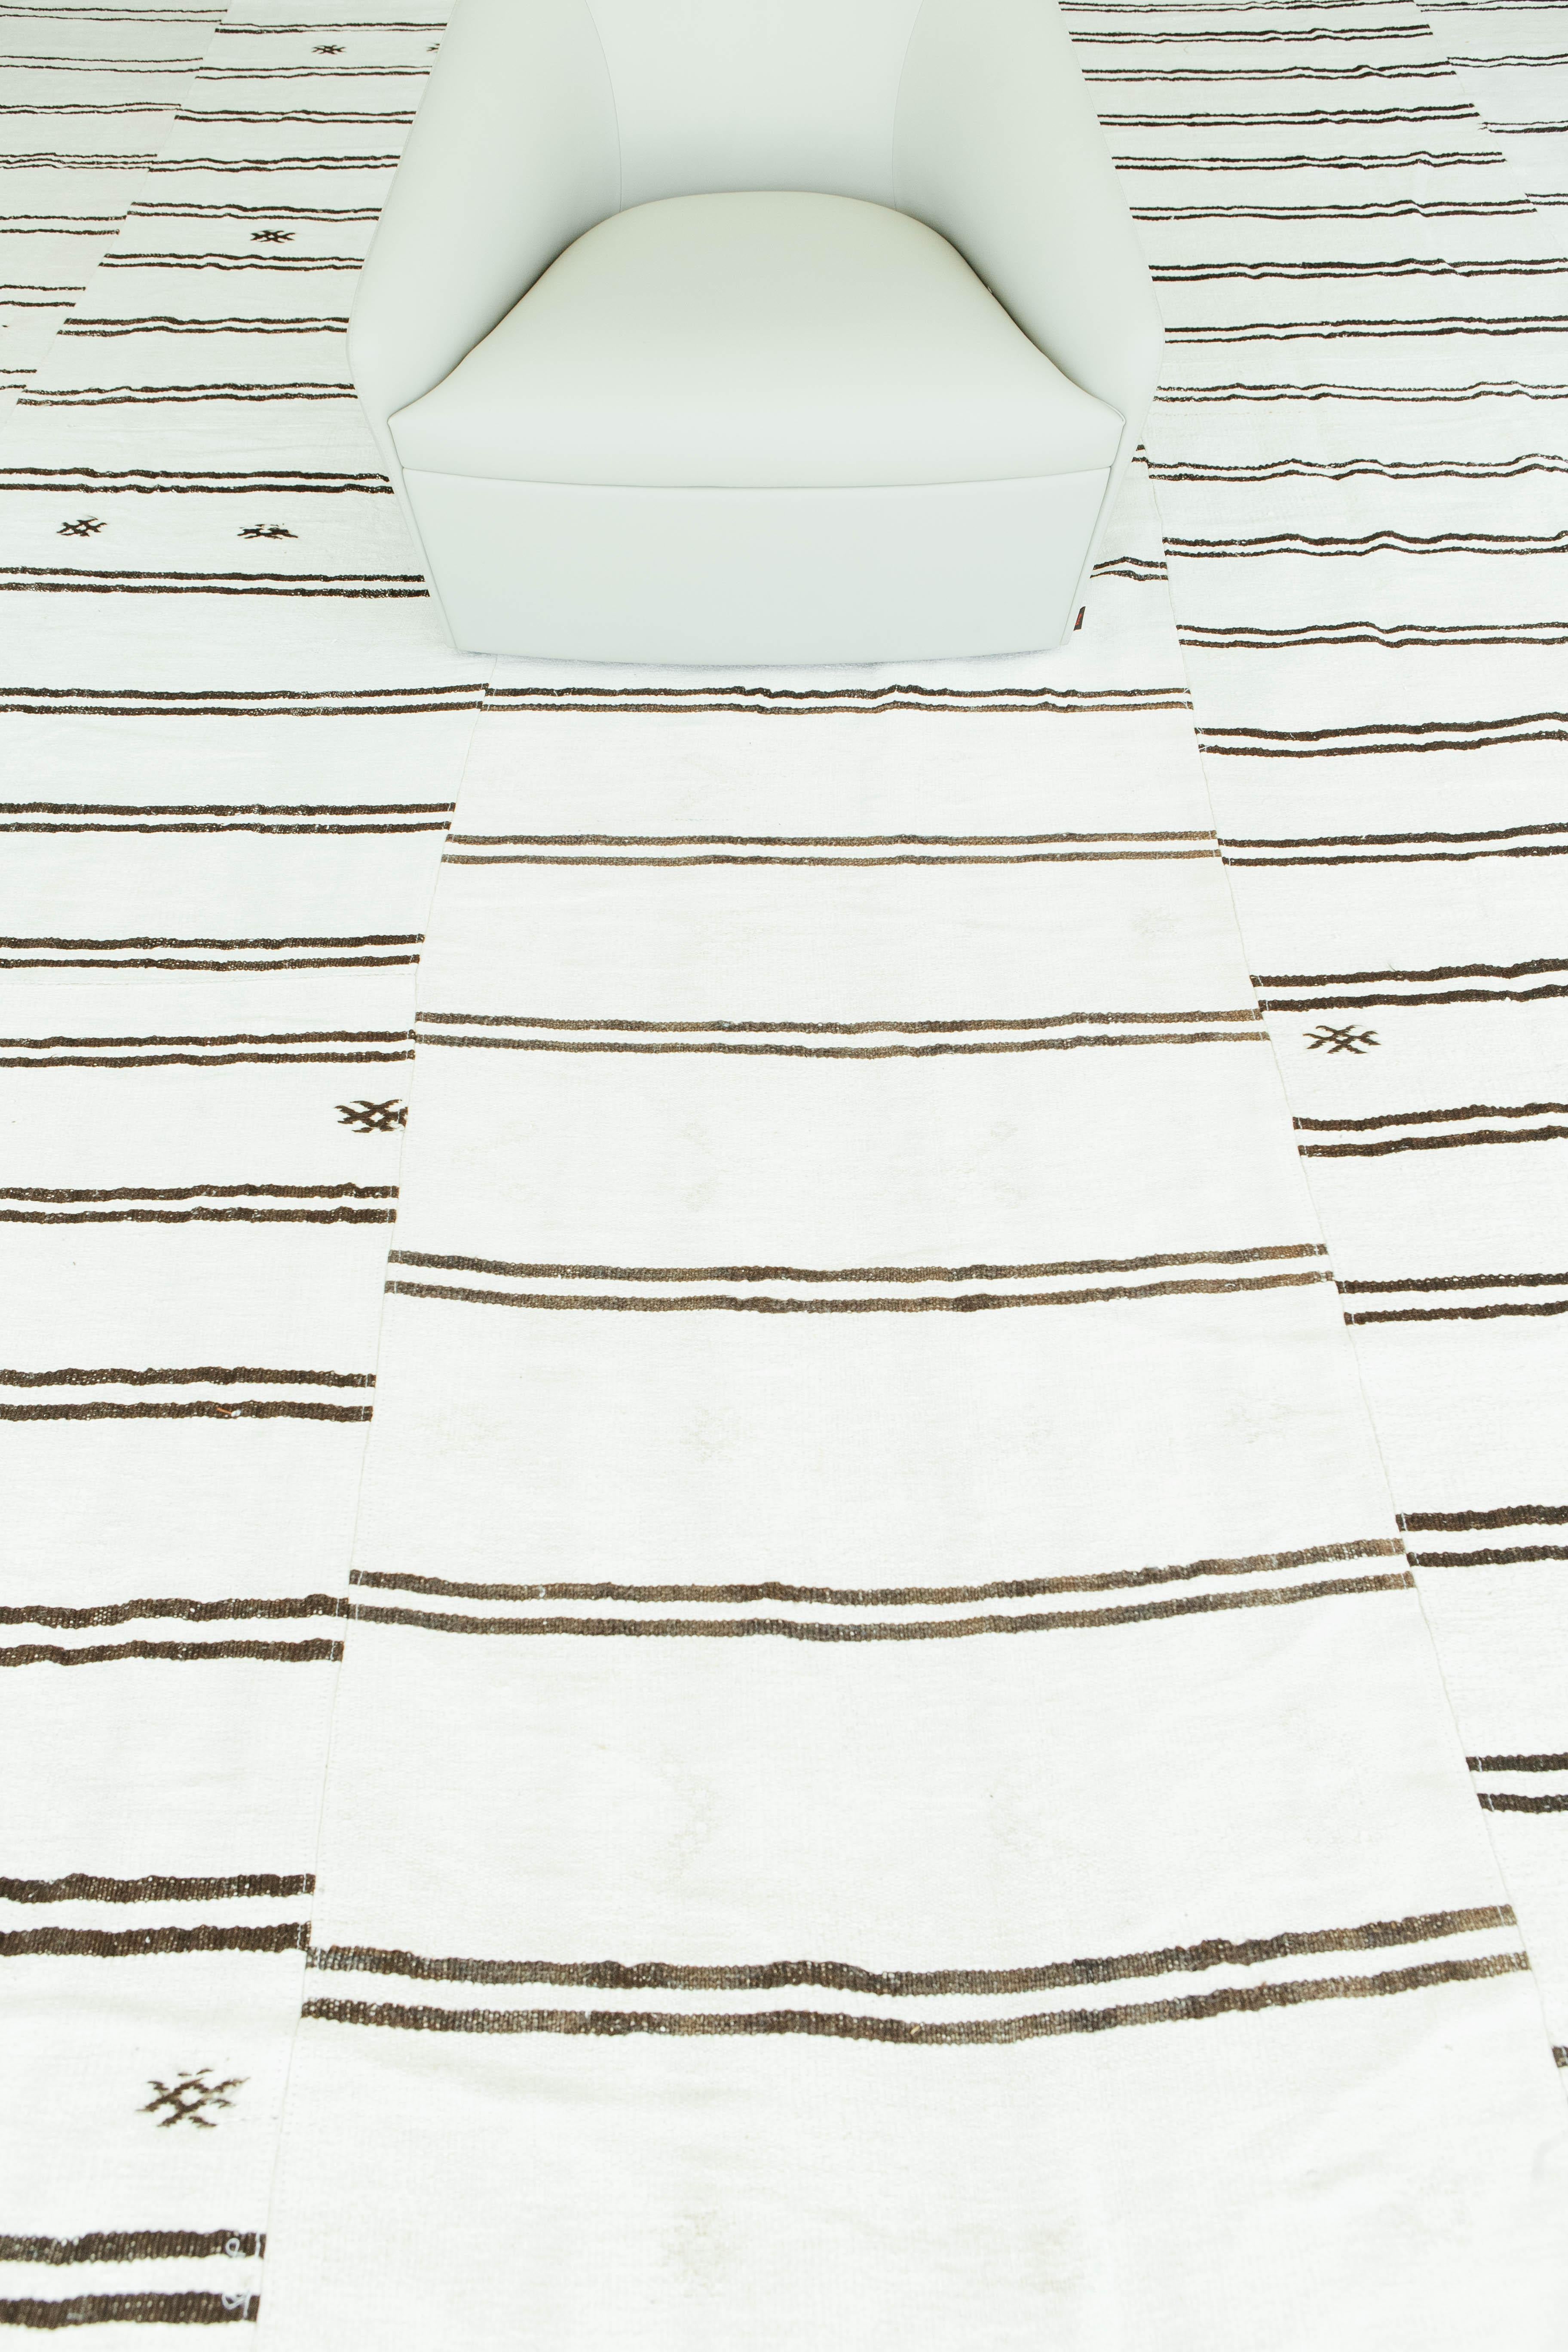 A gorgeous vintage Anatolian Turkish flat-weave banded in ivory and irregular brown stripes. Sporadic tribal designs and varying degrees of stripes create a simple yet interesting design for a wide variety of interiors. Vintage Turkish Anatolian